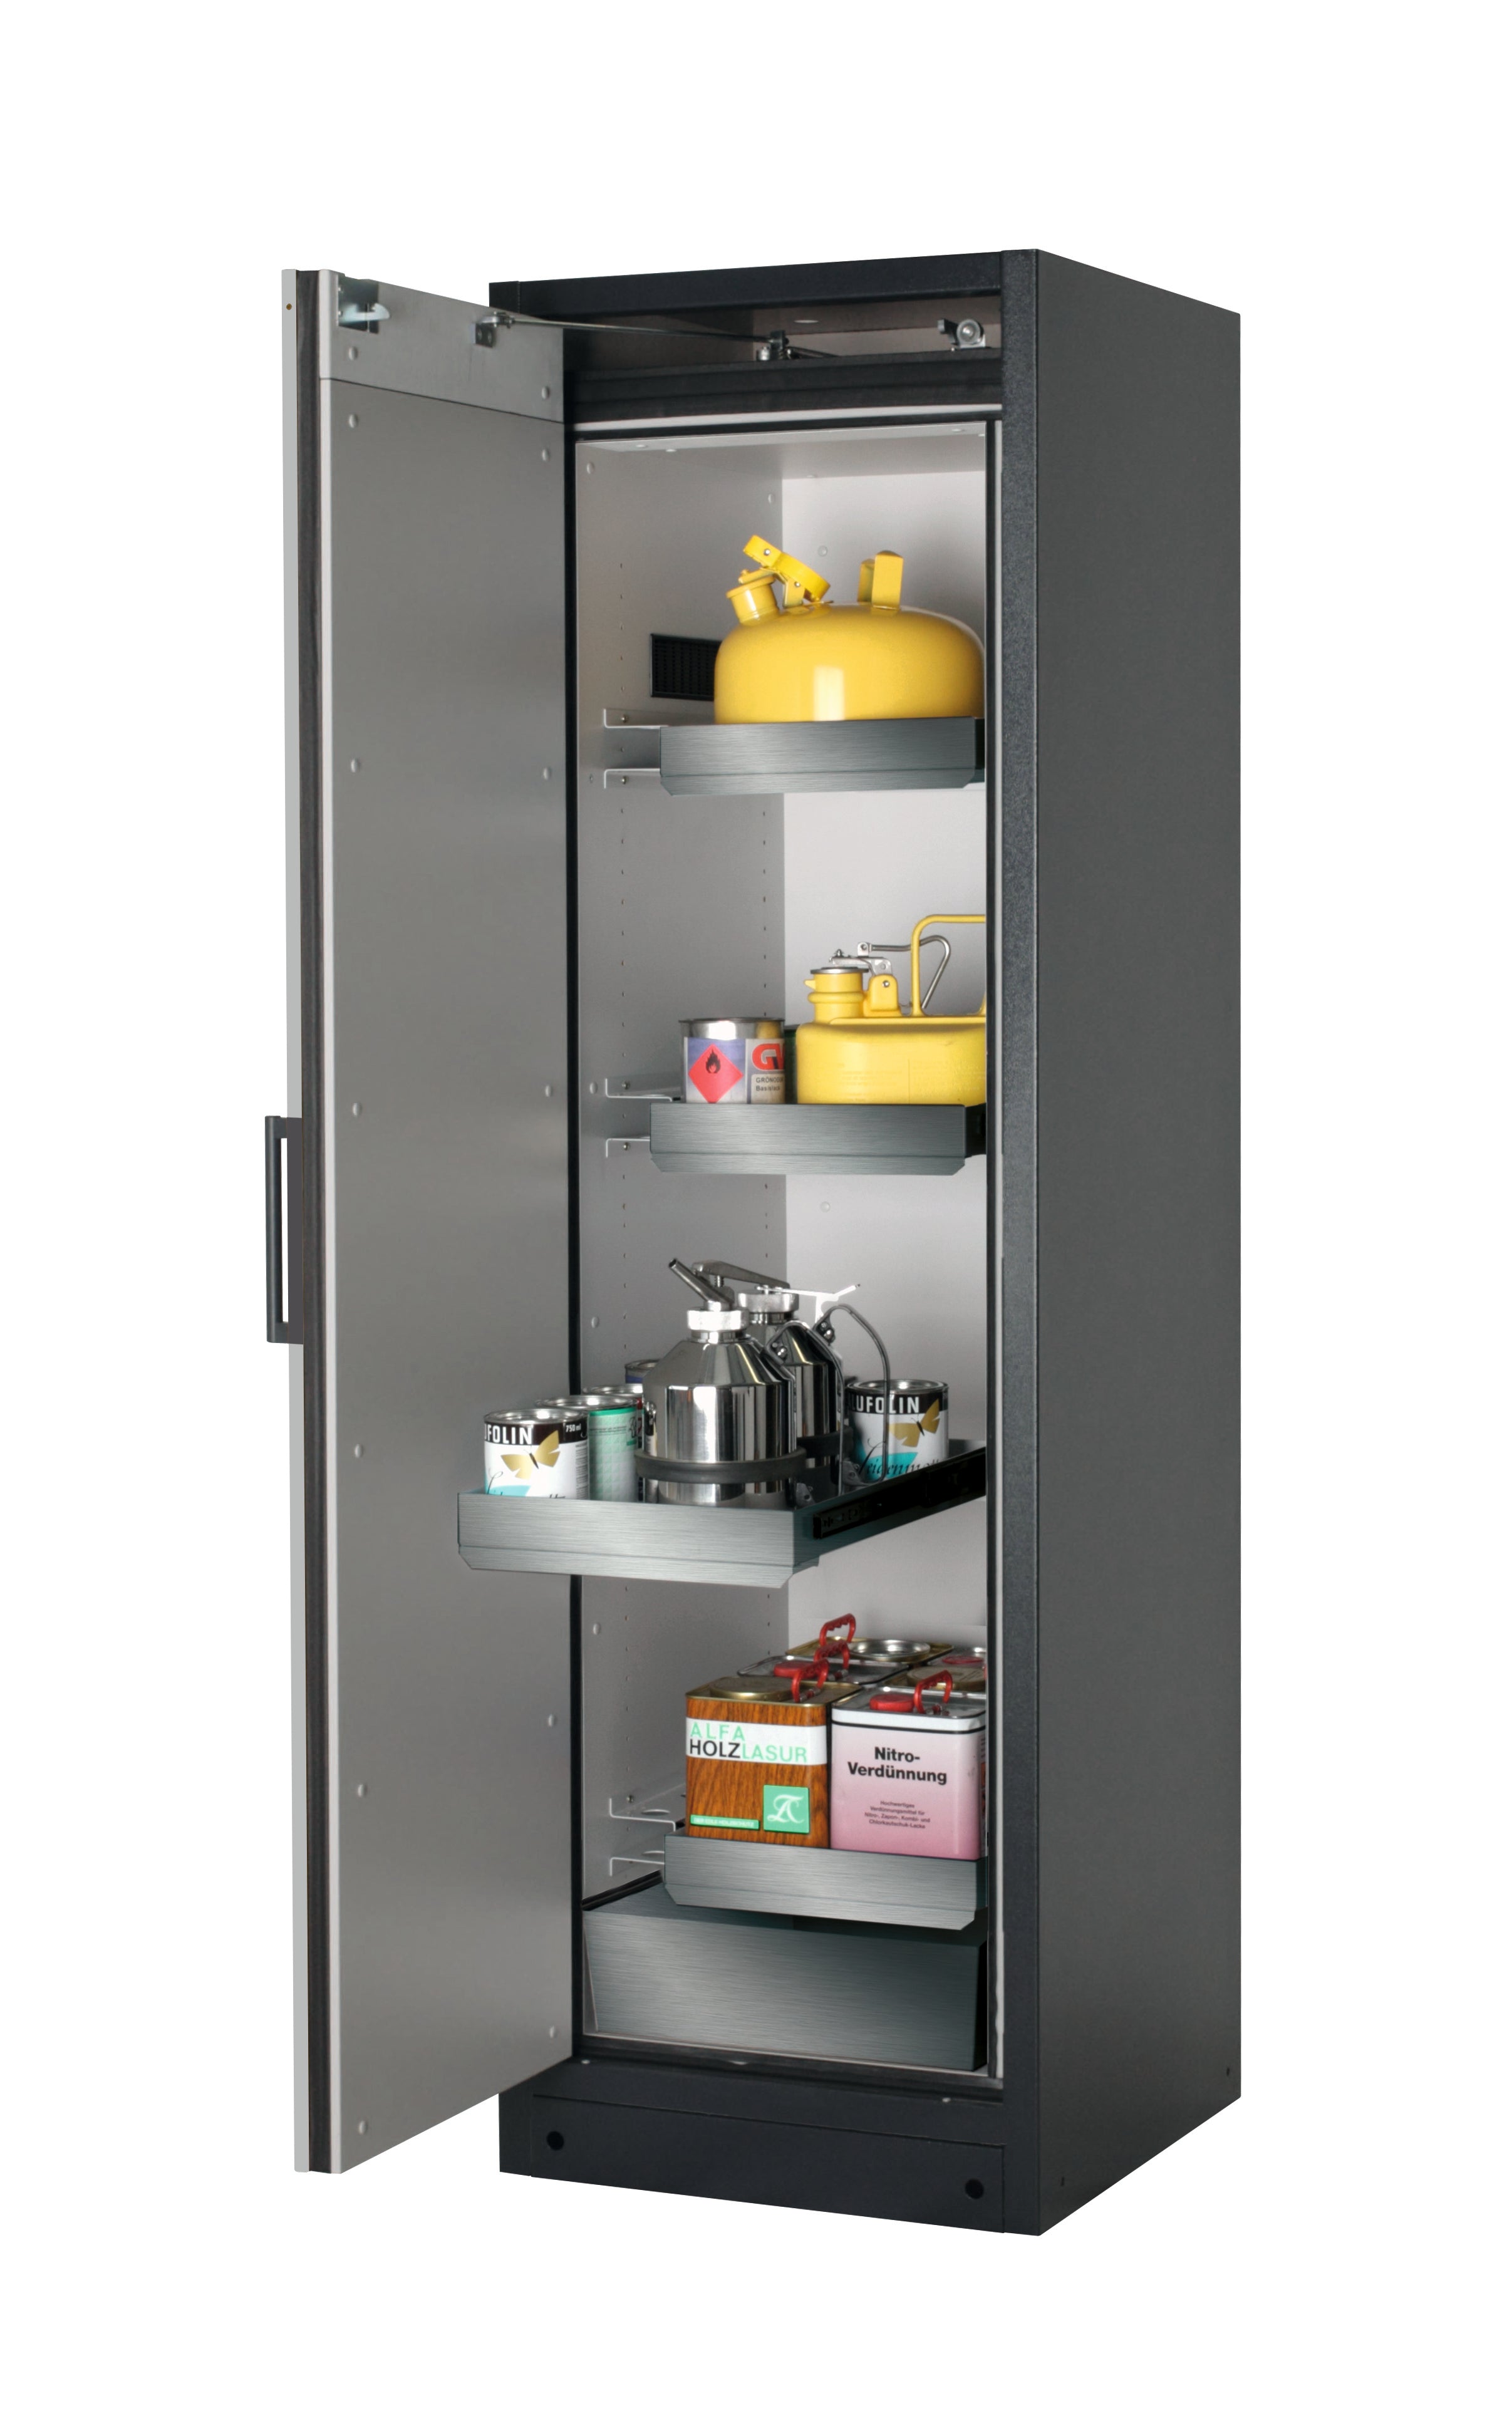 Type 90 safety storage cabinet Q-CLASSIC-90 model Q90.195.060 in pure white RAL 9010 with 3x drawer (standard) (stainless steel 1.4301),